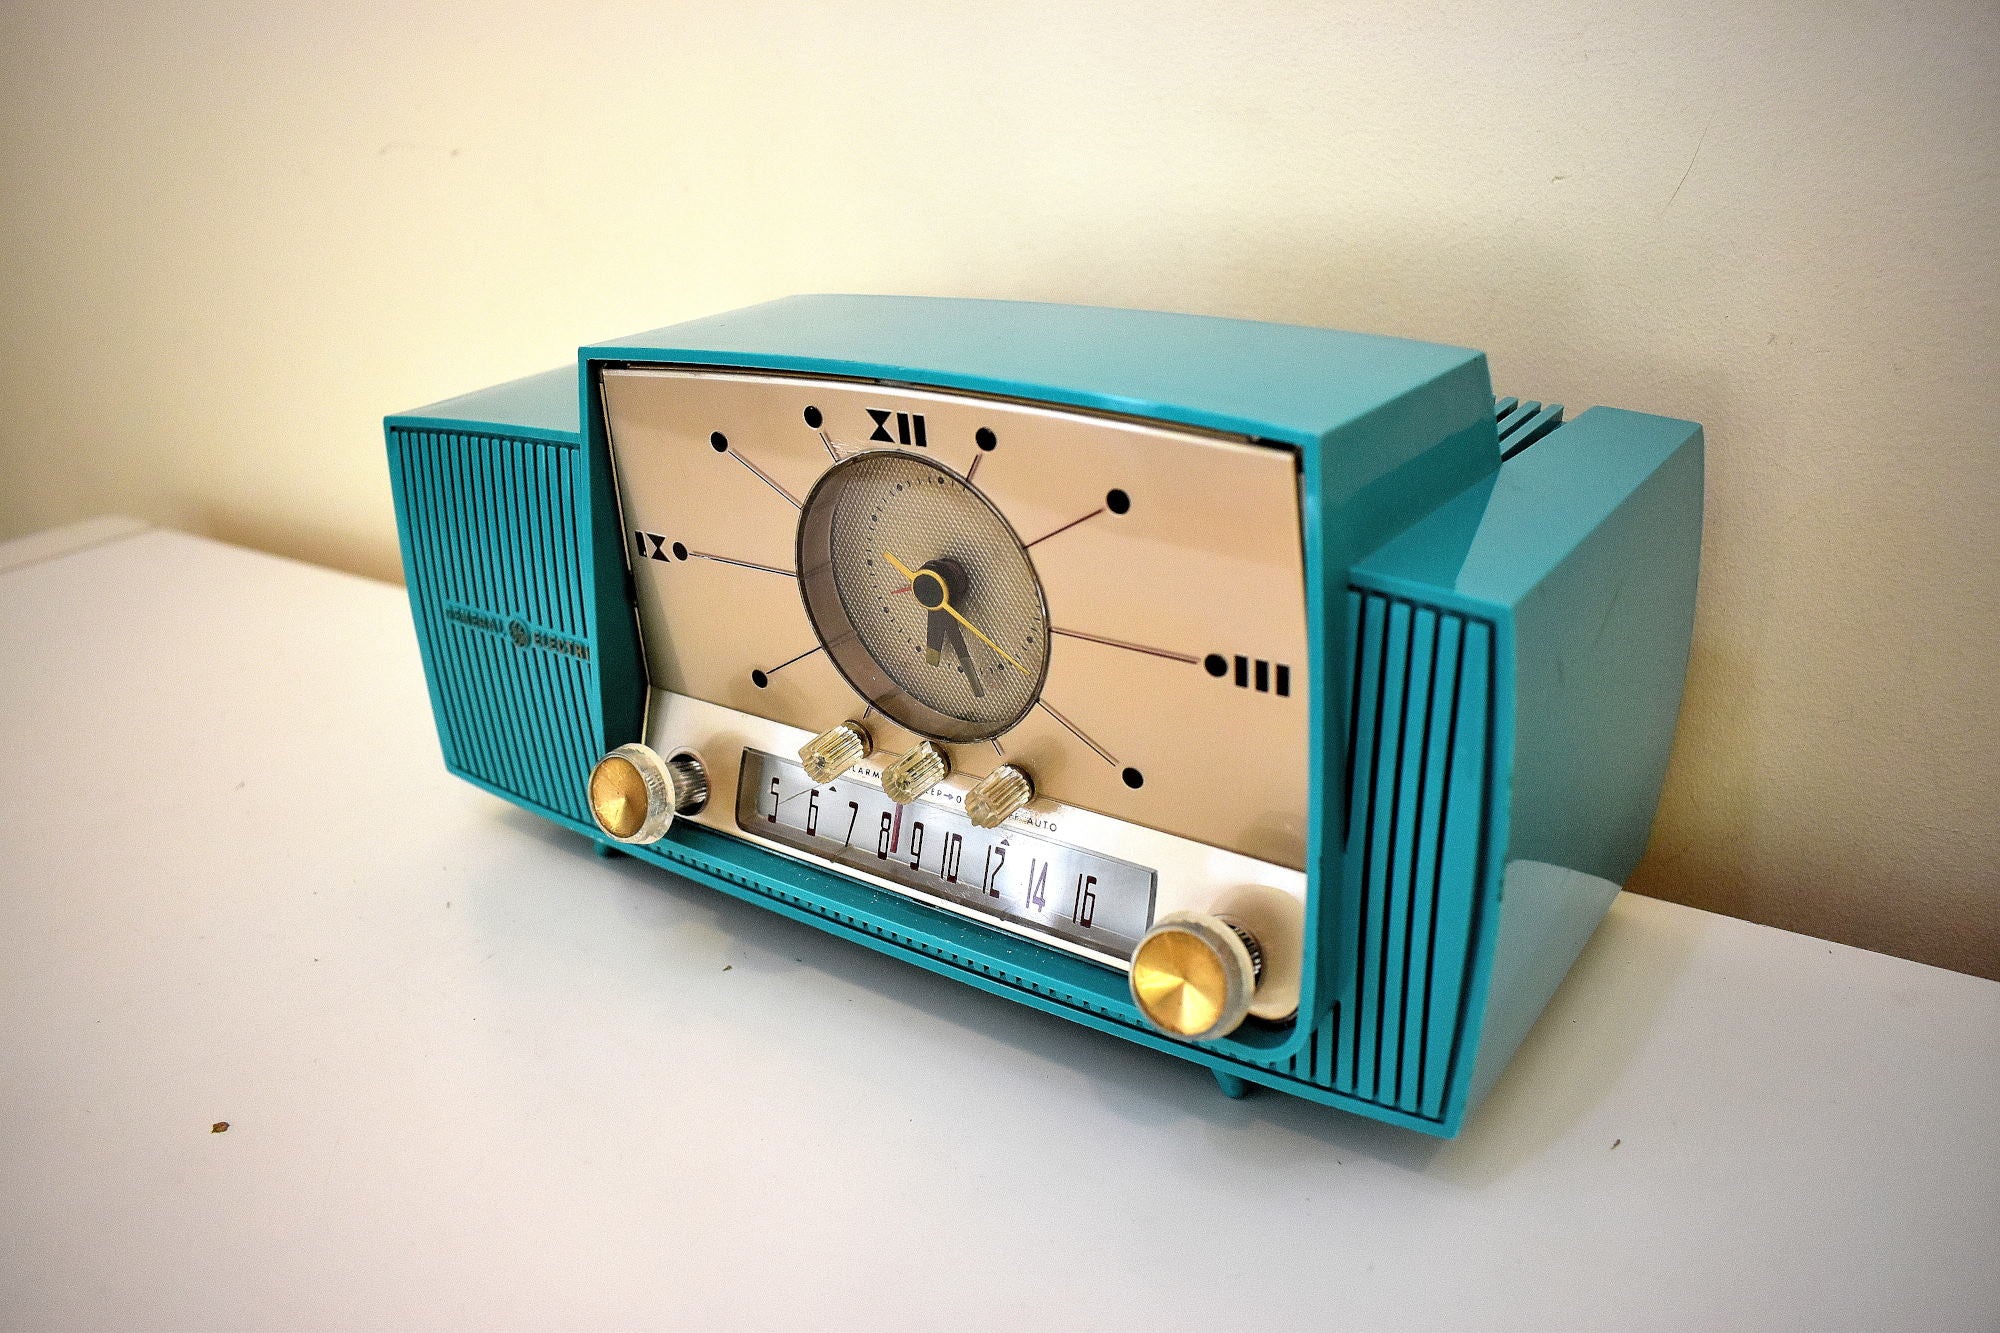 Seafoam Green Turquoise 1959 GE General Electric Model 914D AM Vacuum Tube Clock Radio Excellent Condition Rare Desirable Color!